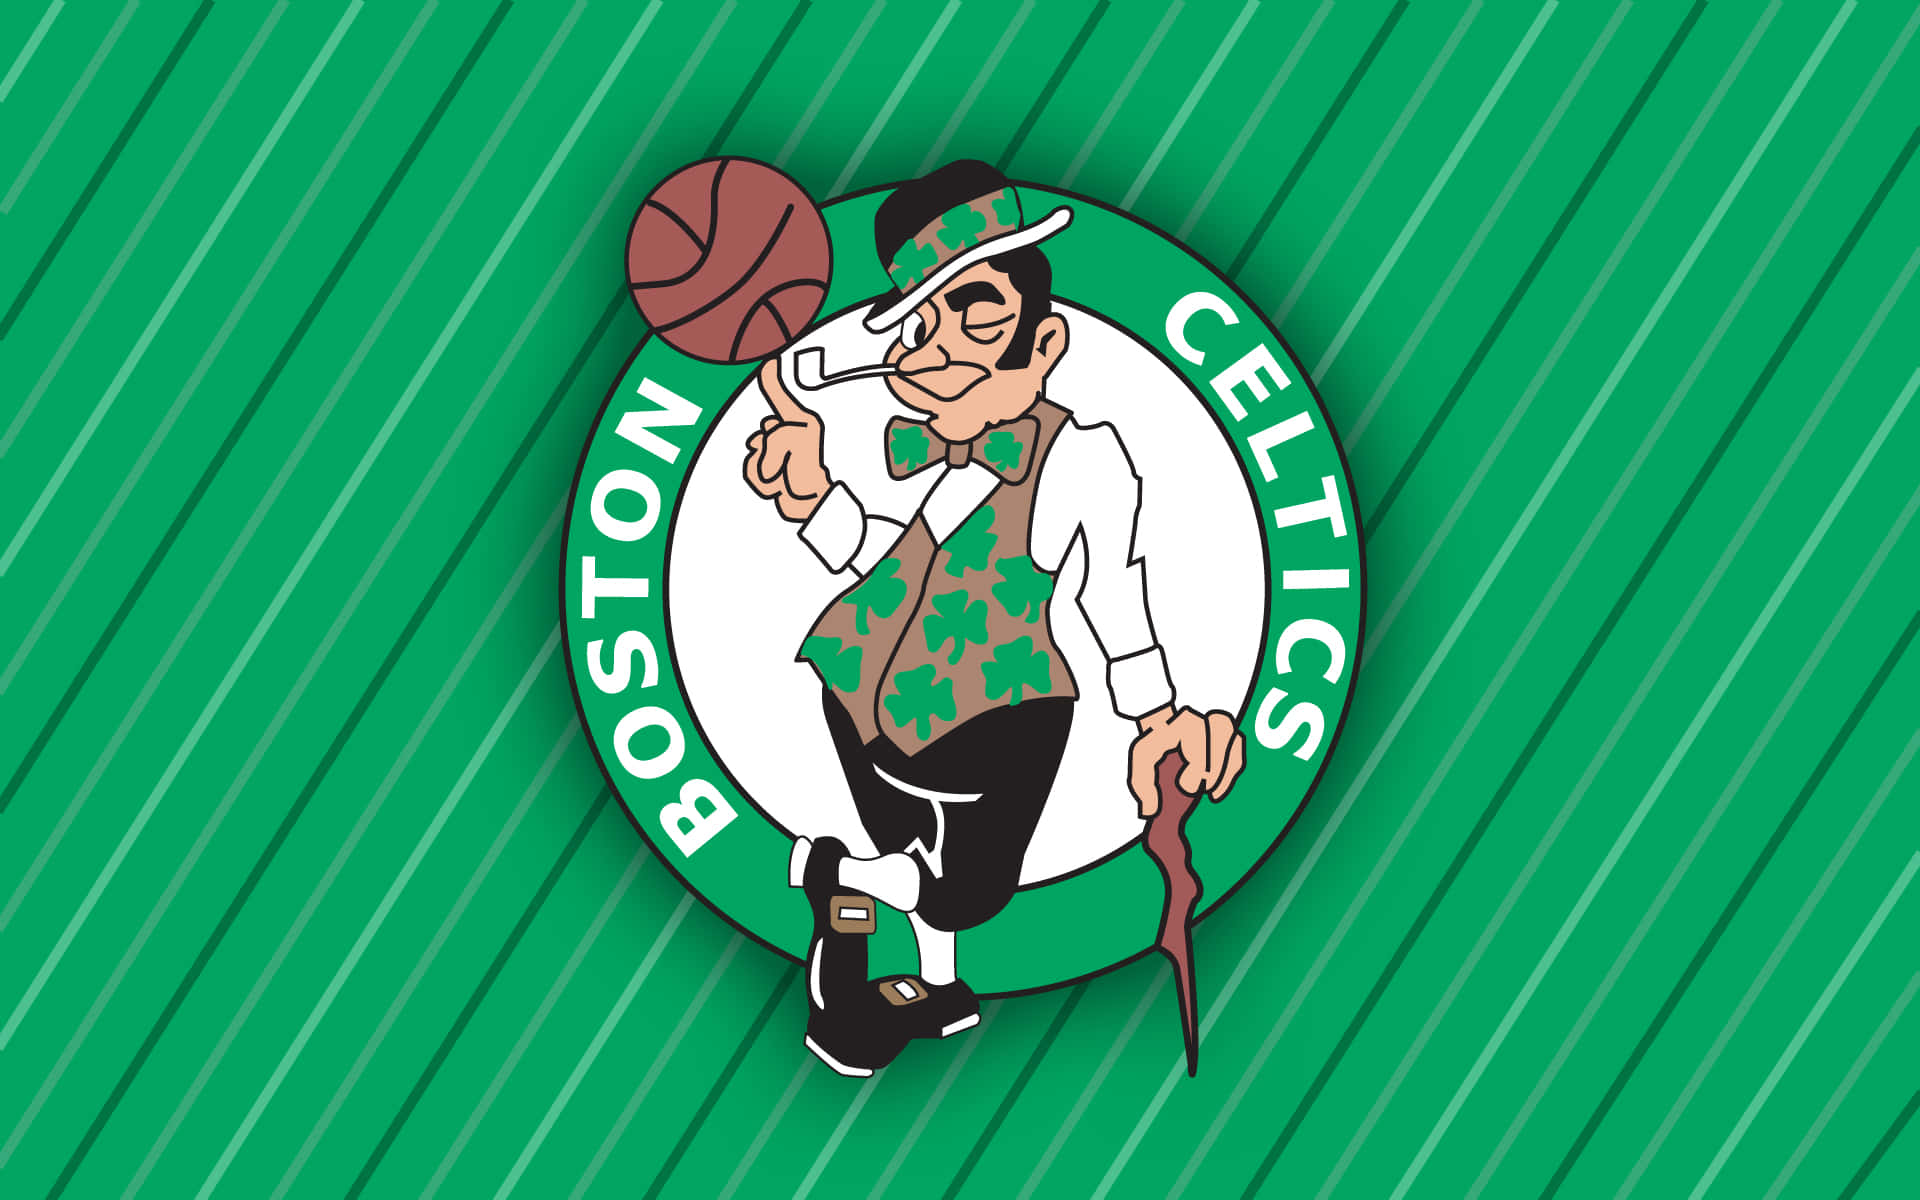 Five-time NBA Champions, the Boston Celtics, Showing their Dominance